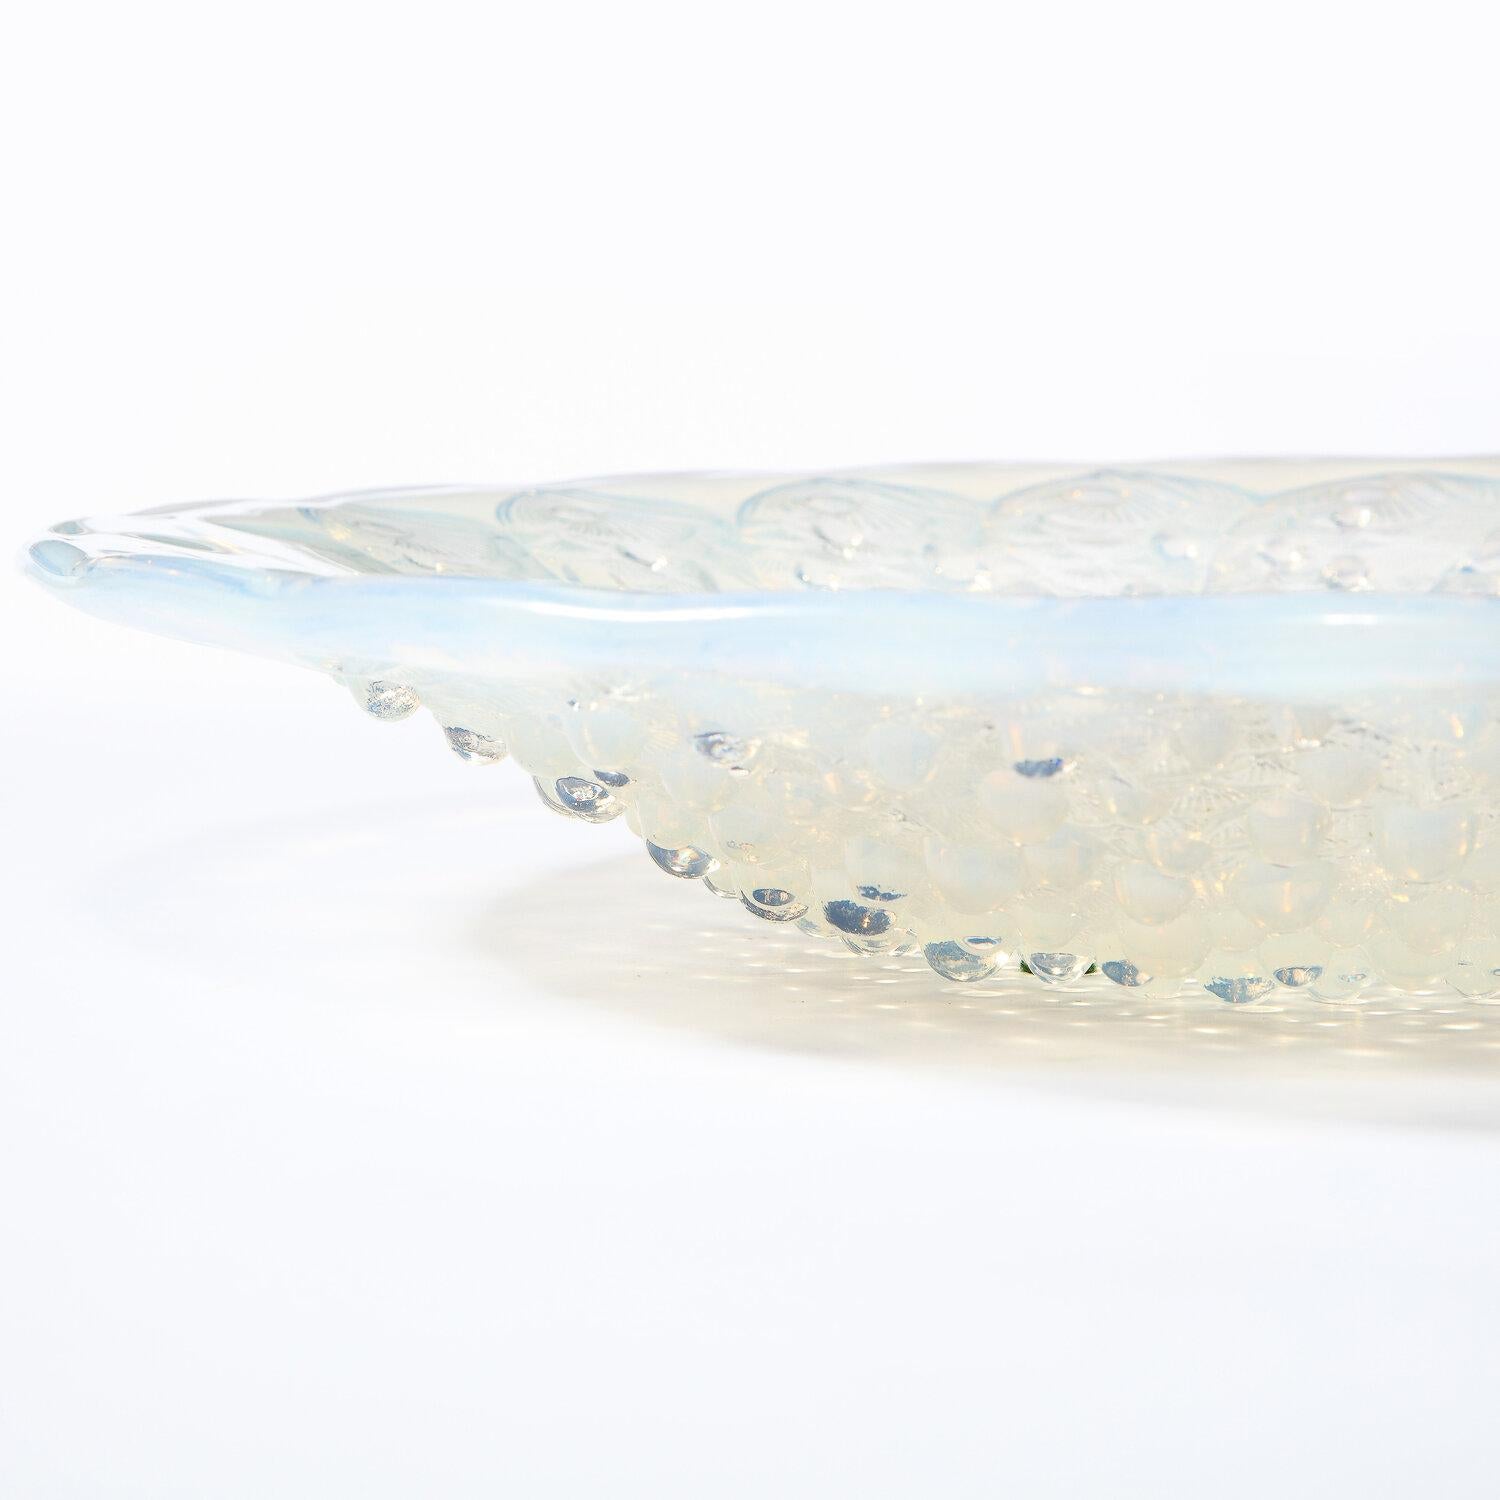 Art Deco Opalescent Glass Center Bowl with Repeating Fish Motif by Lalique For Sale 3